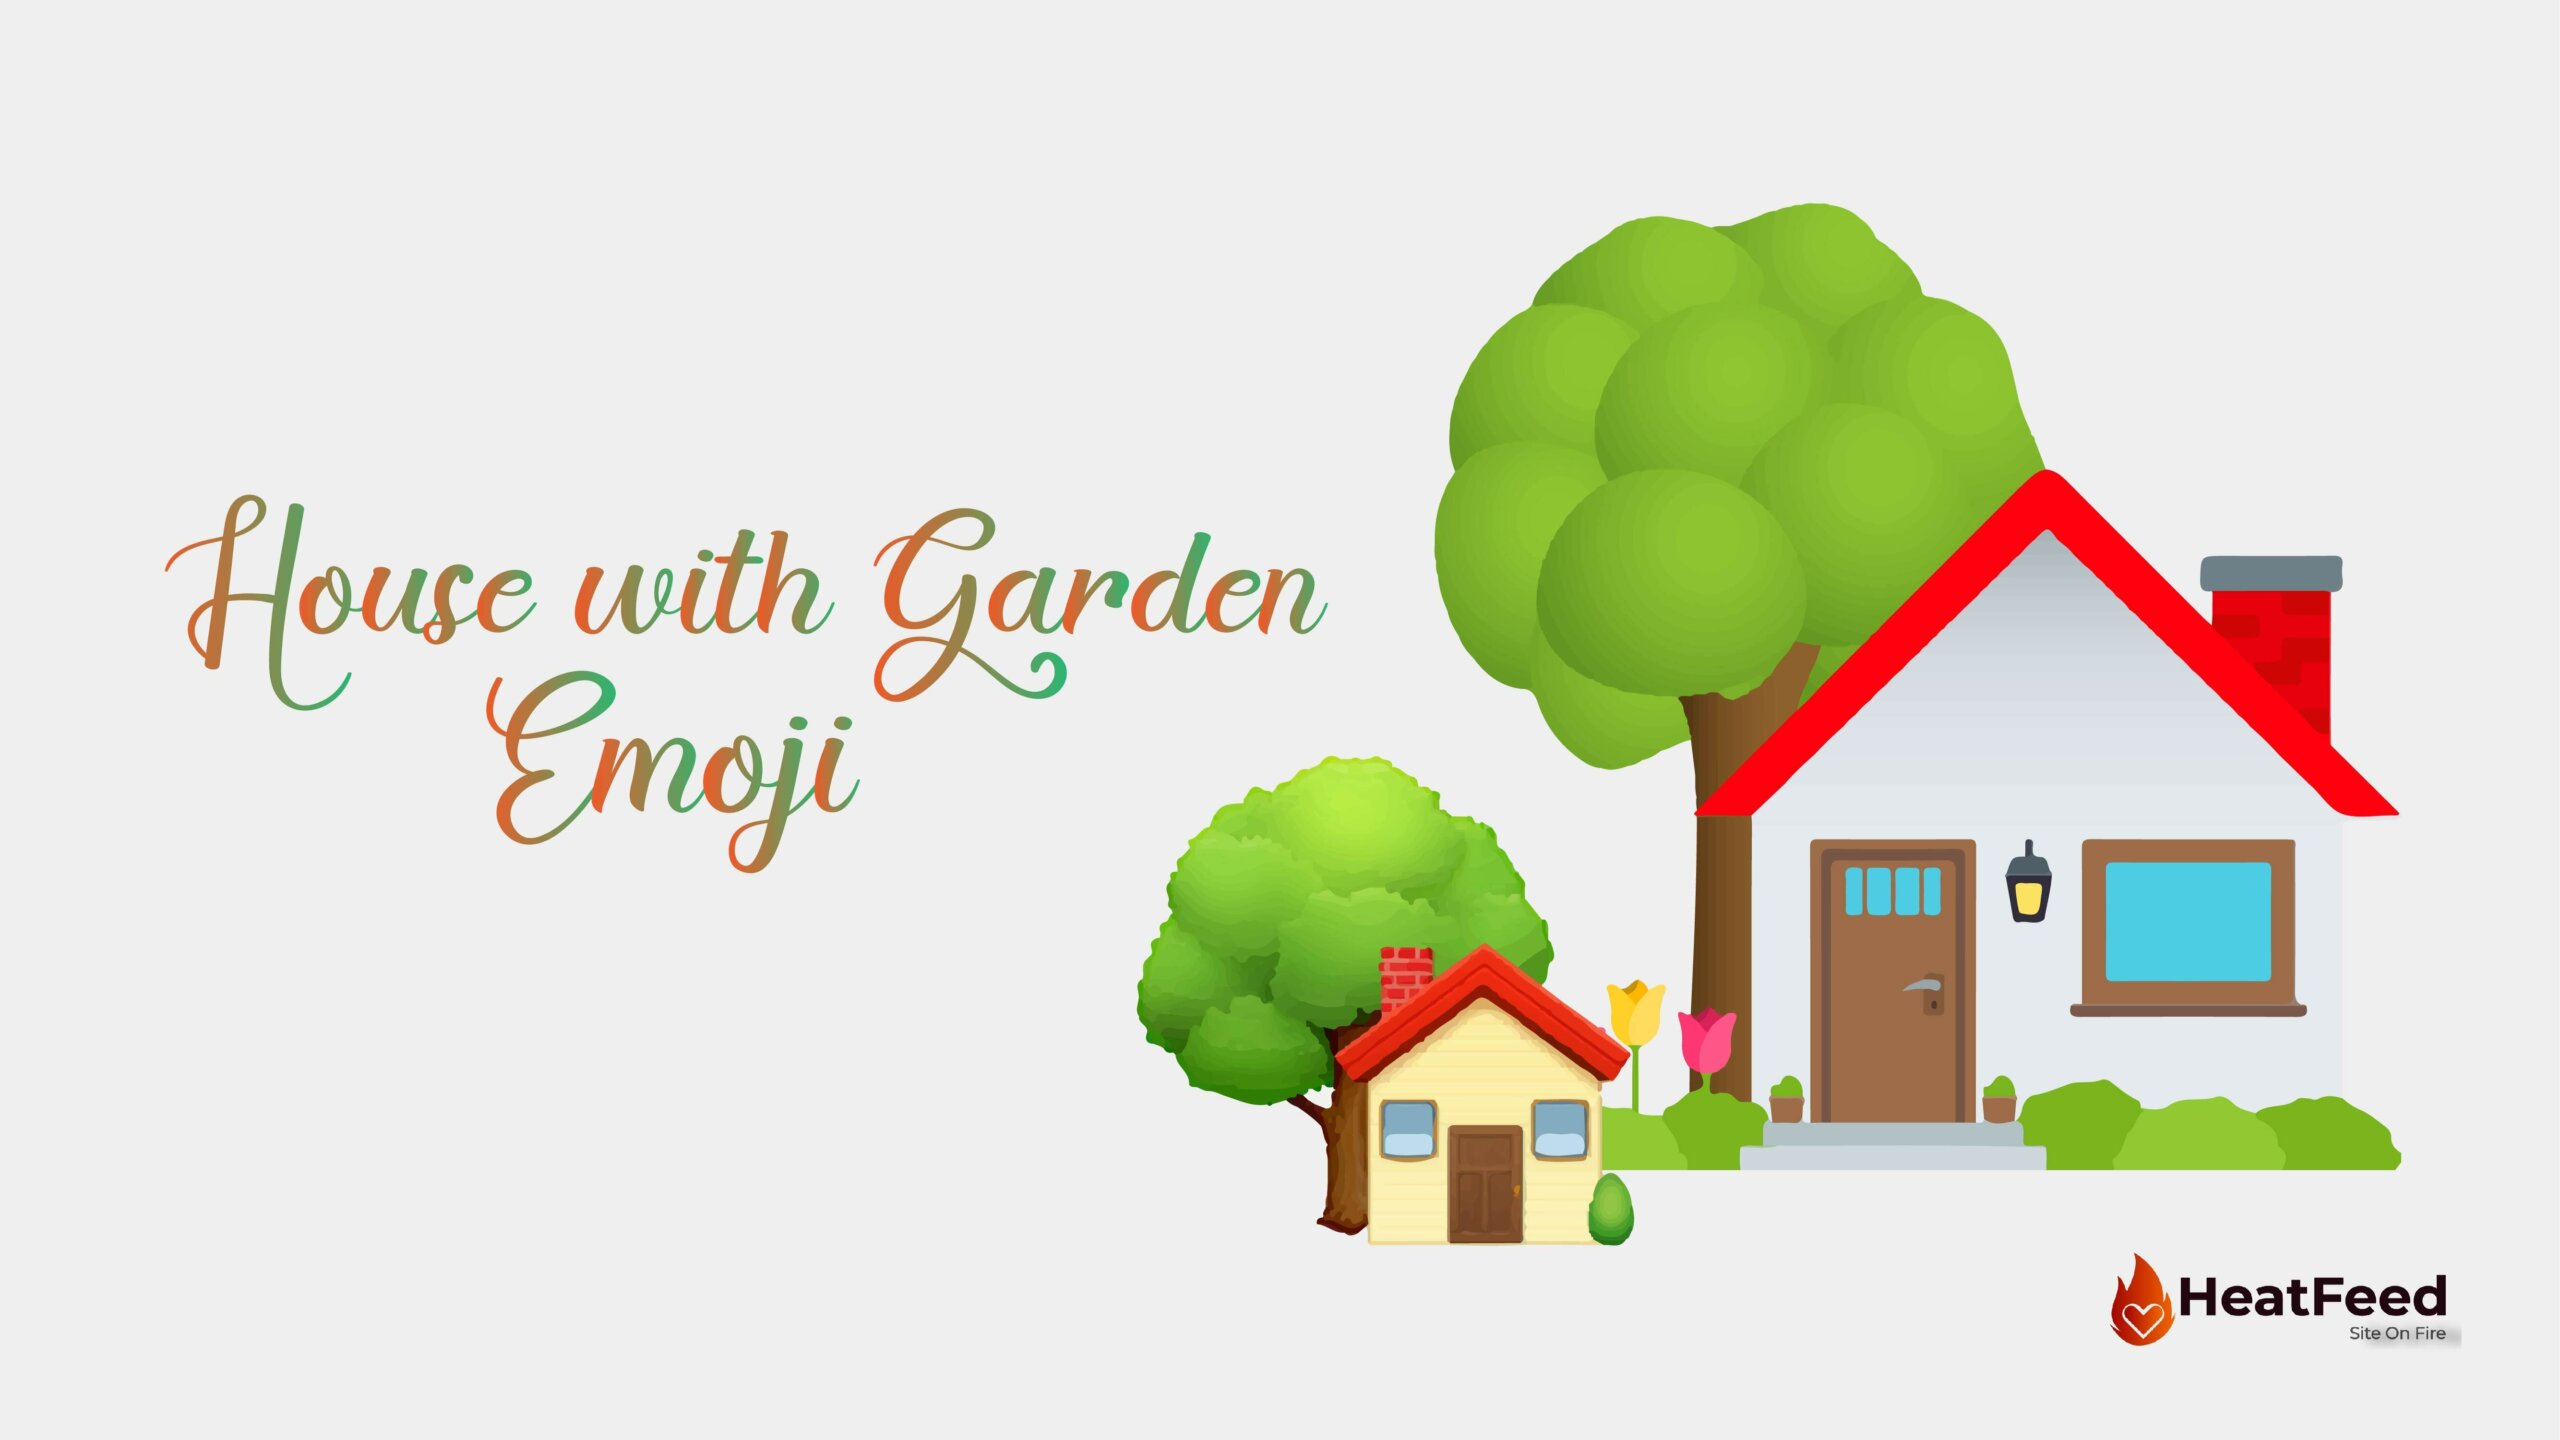 House with Garden Emoji 🏡 Meaning, ️copy and 📋paste